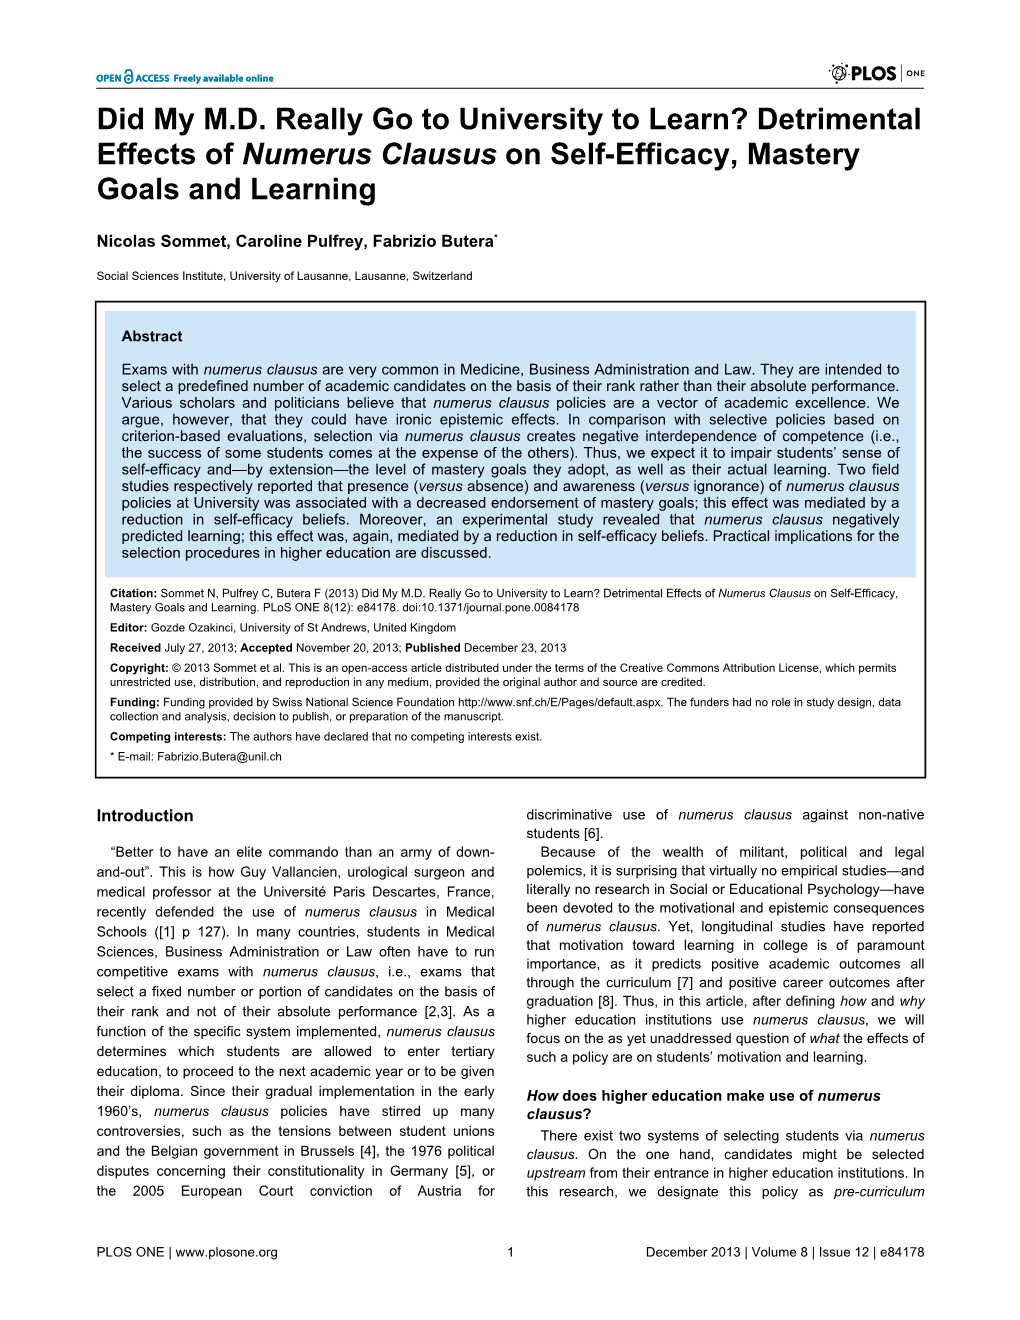 Detrimental Effects of Numerus Clausus on Self-Efficacy, Mastery Goals and Learning